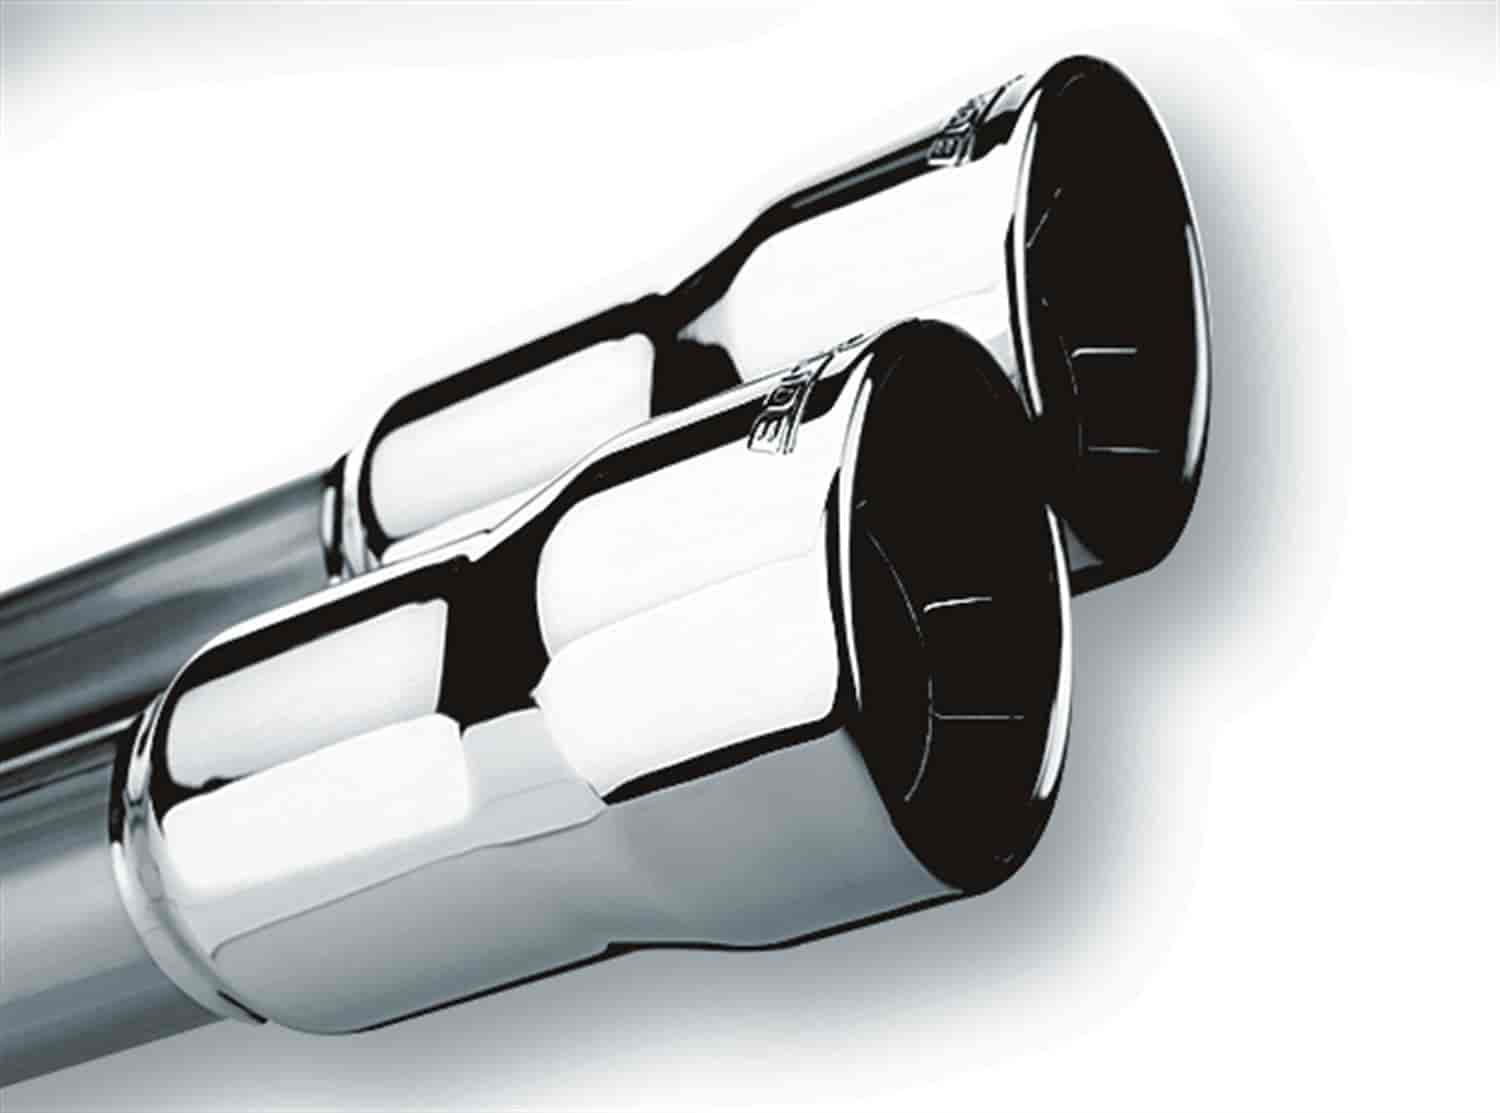 Stainless Steel Exhaust Tip Outlet Size: Dual 3"